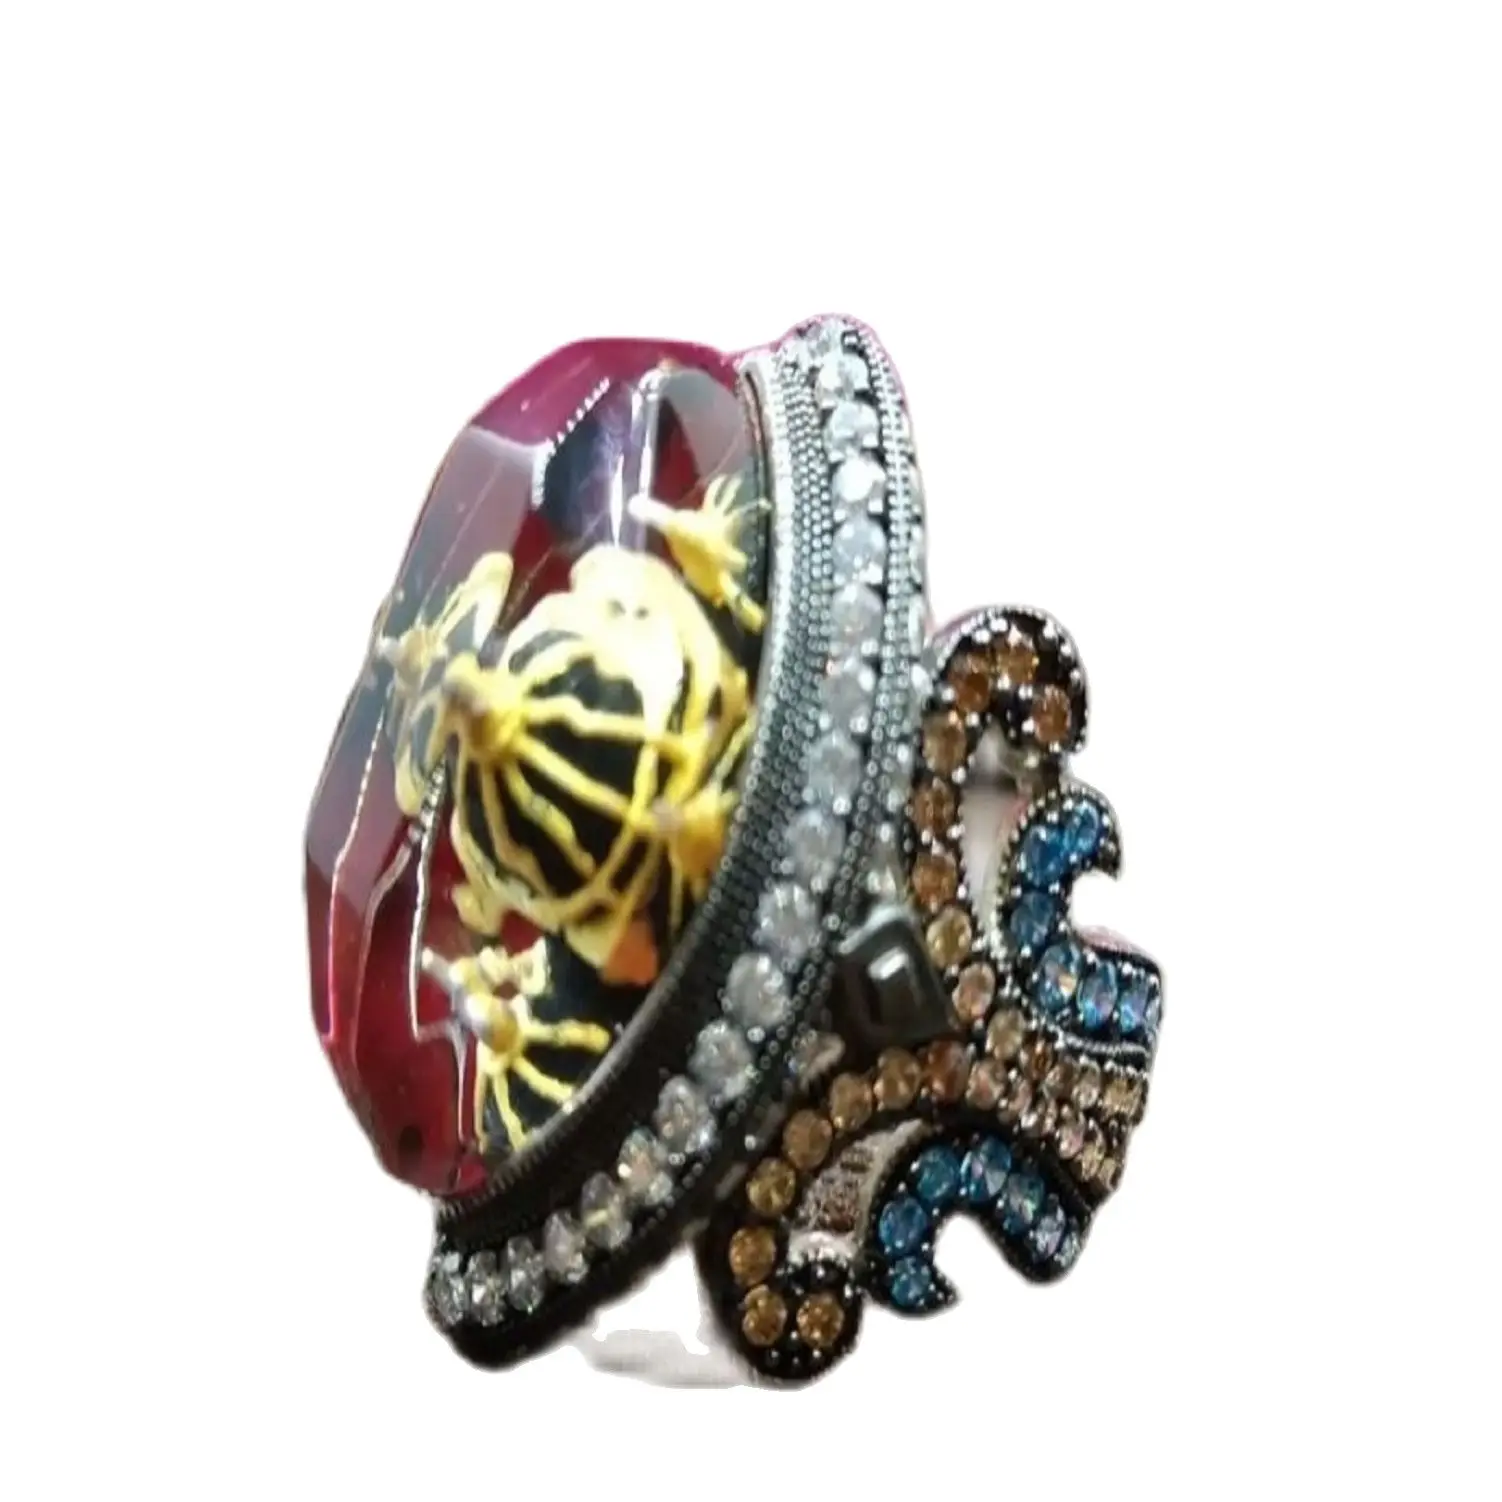 Hagia Sophia Engraved Ring For Women Islamic Jewelry For Women Muslim Islamic Ottoman Jewellery Glass Engraved Gift Personal